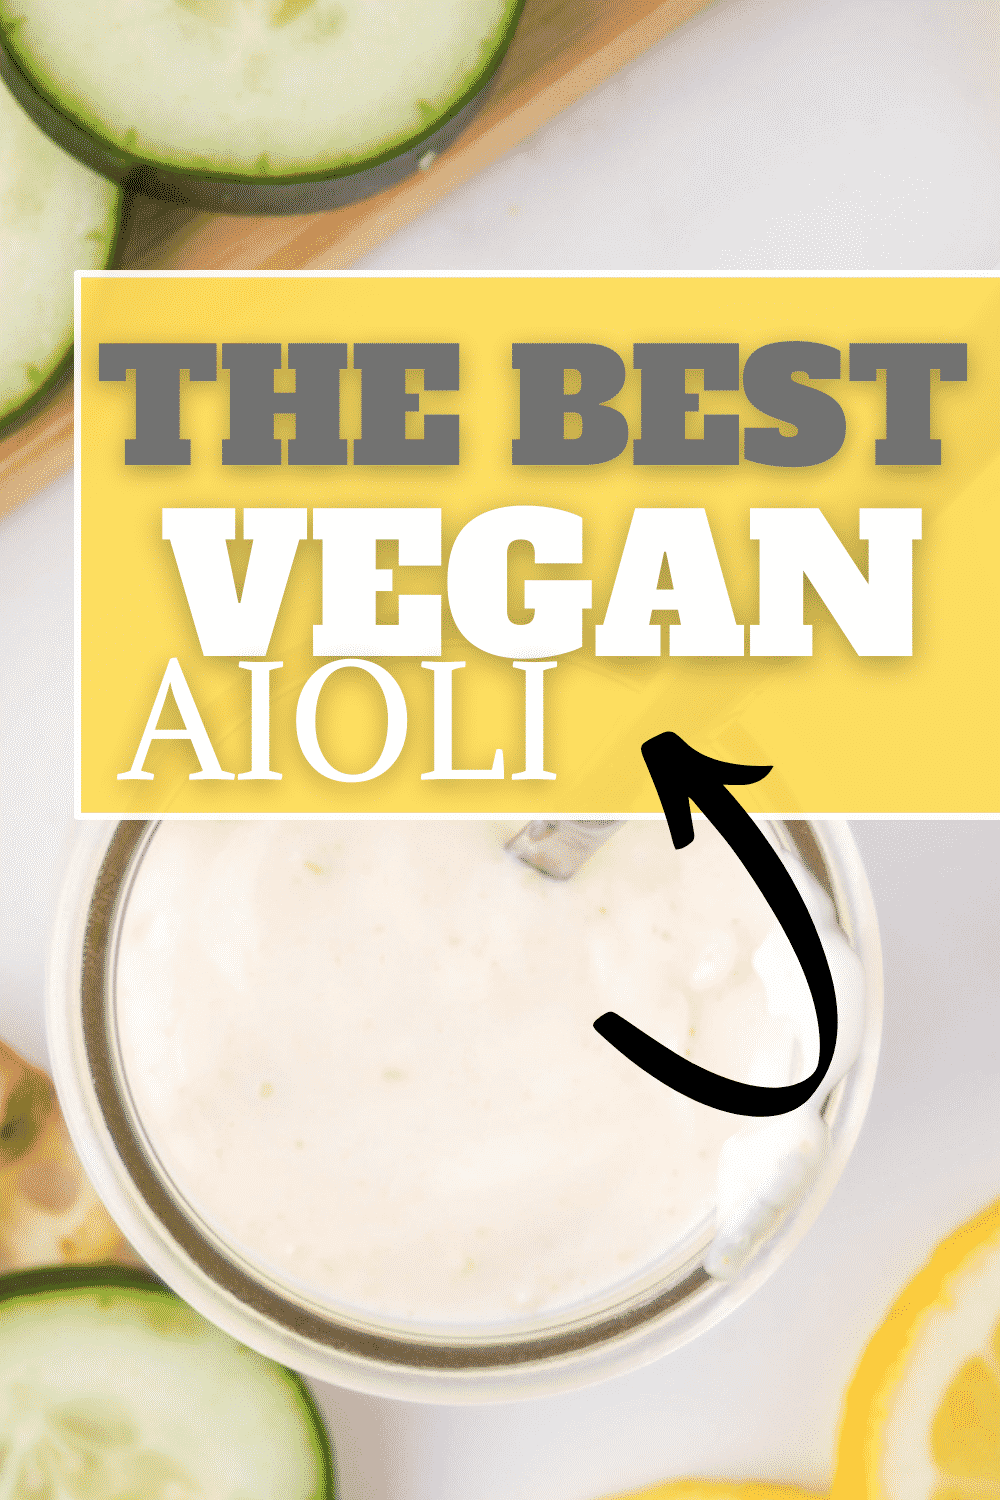 Vegan Aioli is the creamiest, easiest sauce ever! You only need 4 pantry staples to whip up this perfect spread or dip in just a few minutes. #vegansauce #aioli